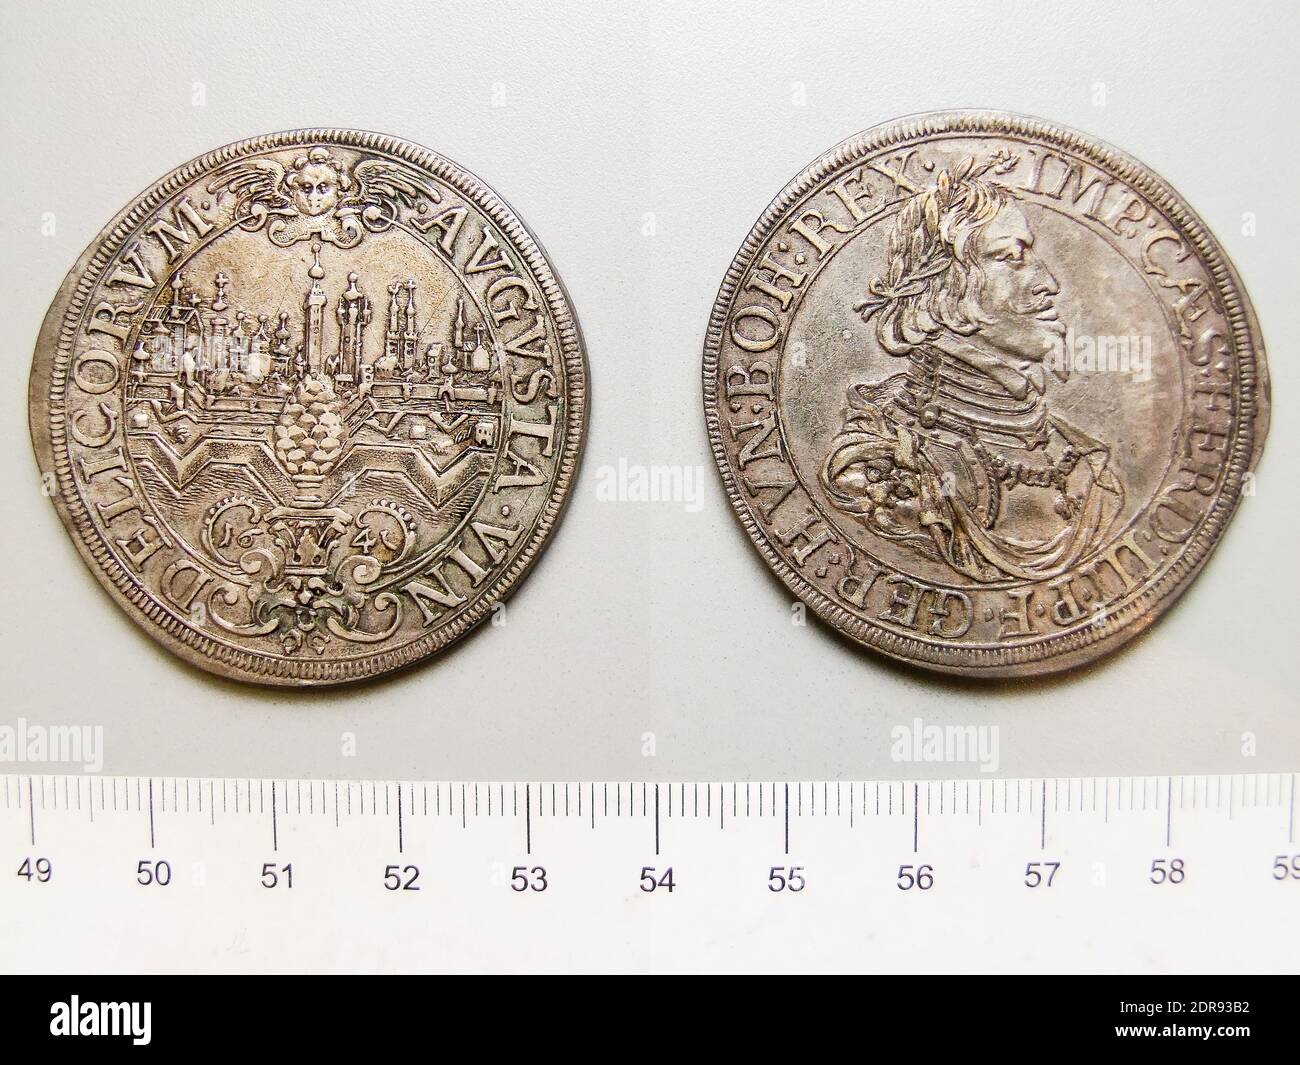 Ruler: Ferdinand III, Holy Roman Emperor, Austrian, 1608–1657, ruled 1637–57, Mint: Augsburg, Magistrate: Johann Bartholomaus Holeisen Jr., 1 Thaler of Ferdinand III, Holy Roman Emperor from Augsburg, Silver, 28.98 g, 12:00, 44.5 mm, Made in Augsburg, Germany, German, 17th century, Numismatics Stock Photo